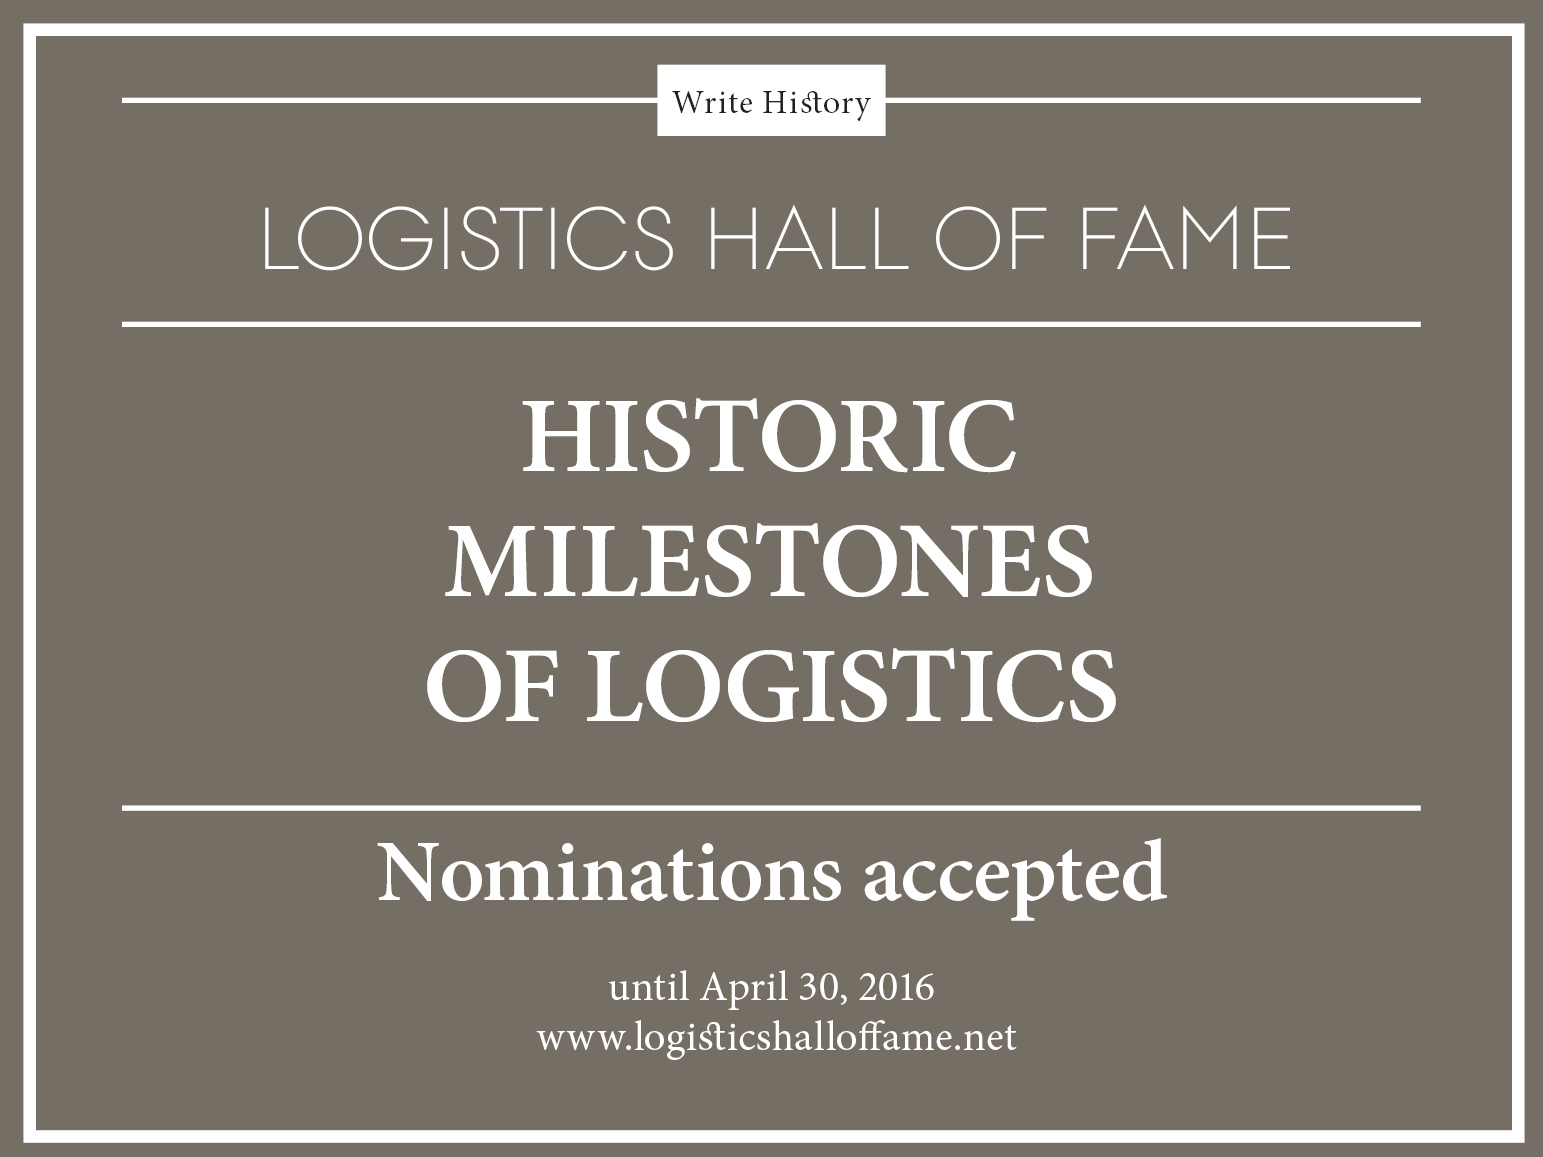 Countdown for Logistics Hall of Fame proposals has begun